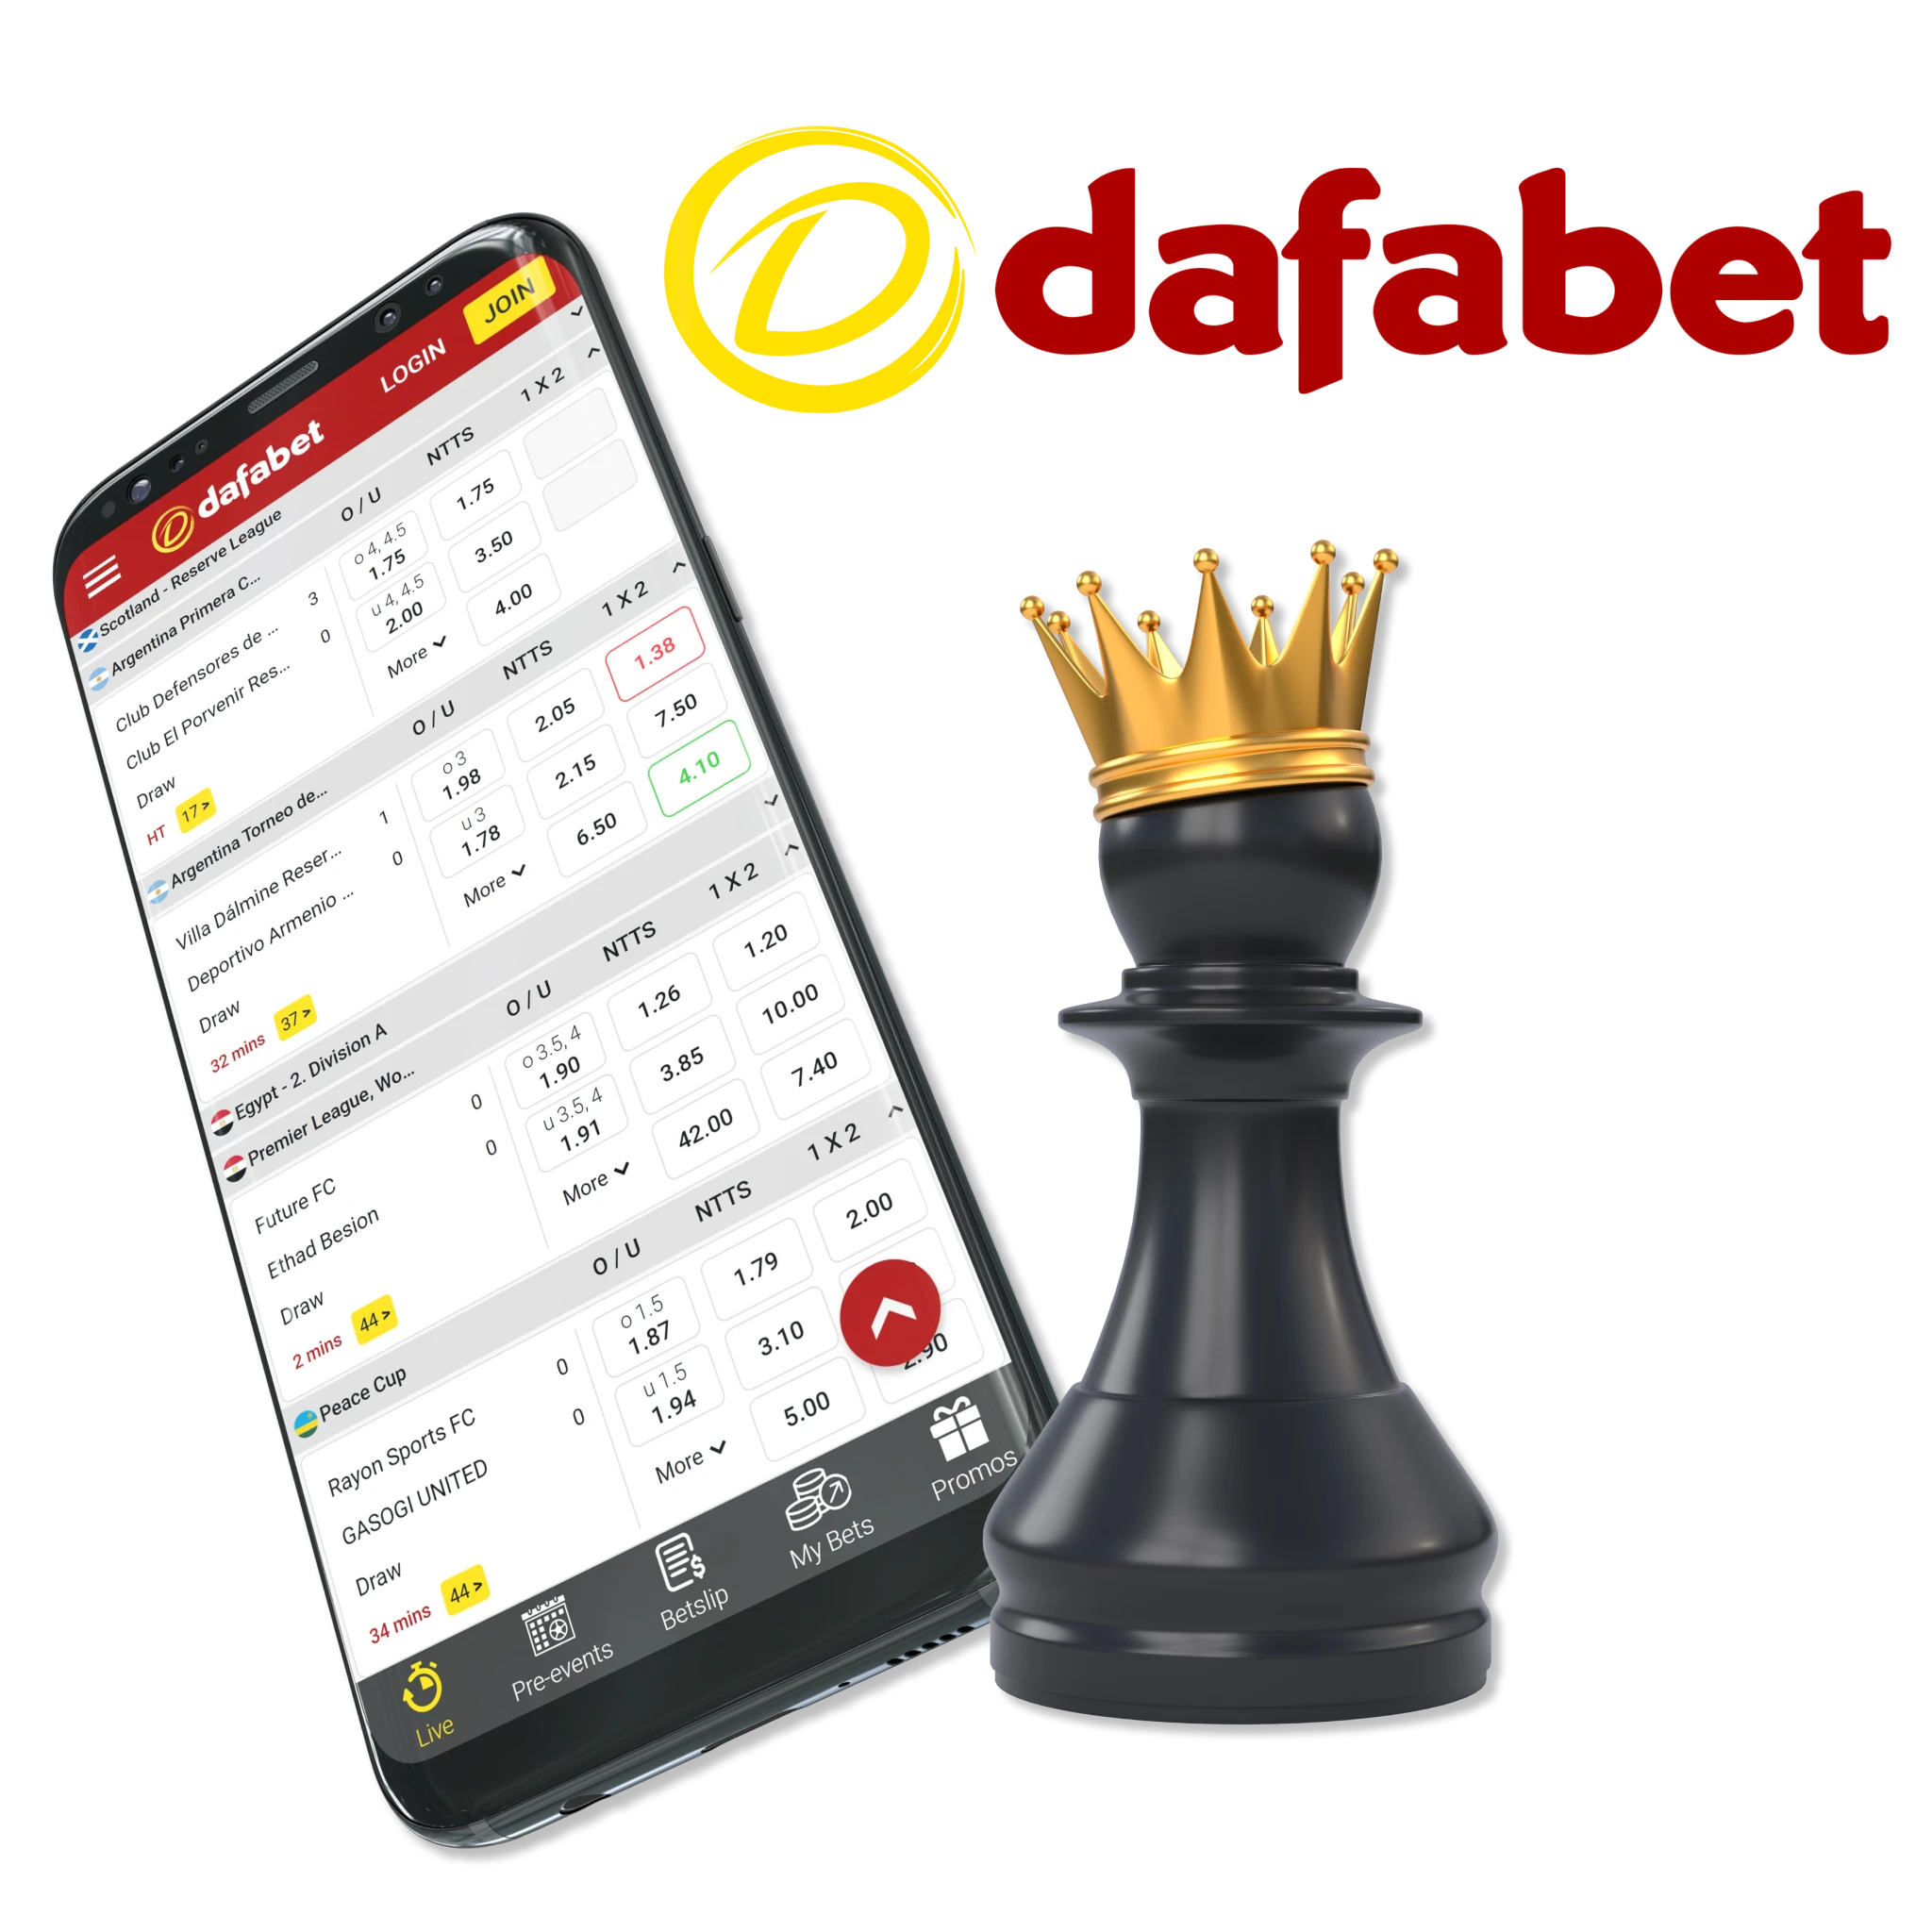 No matter which chess bet you pick, Dafabet will make sure to give you the best possible rewards.